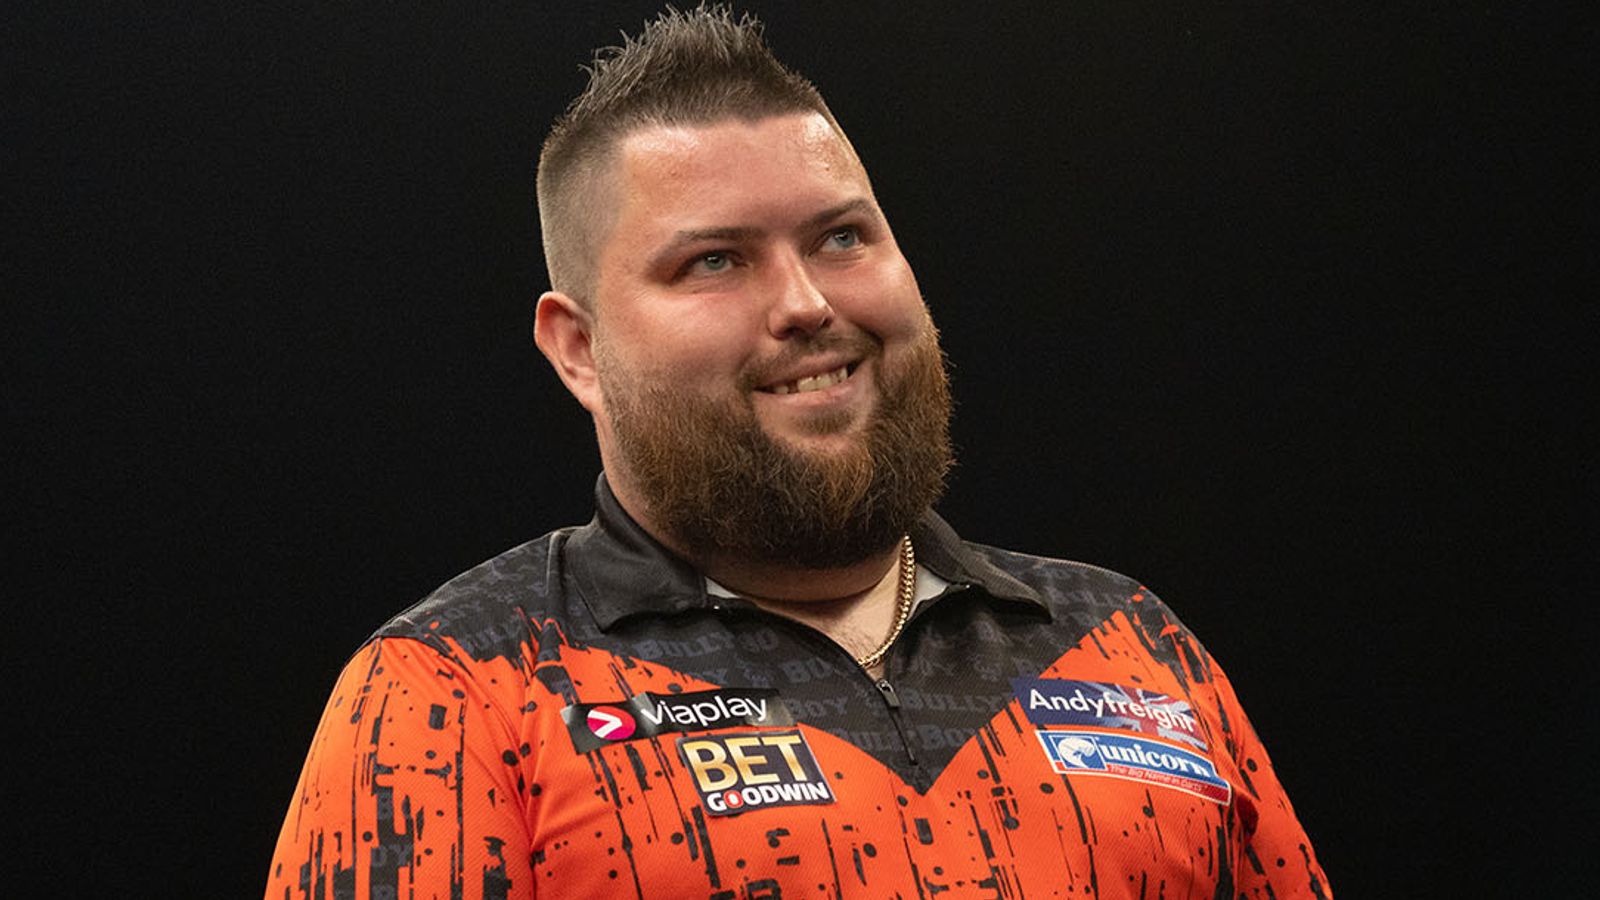 Players Championship: Michael Smith clinches third consecutive Pro Tour title in Germany